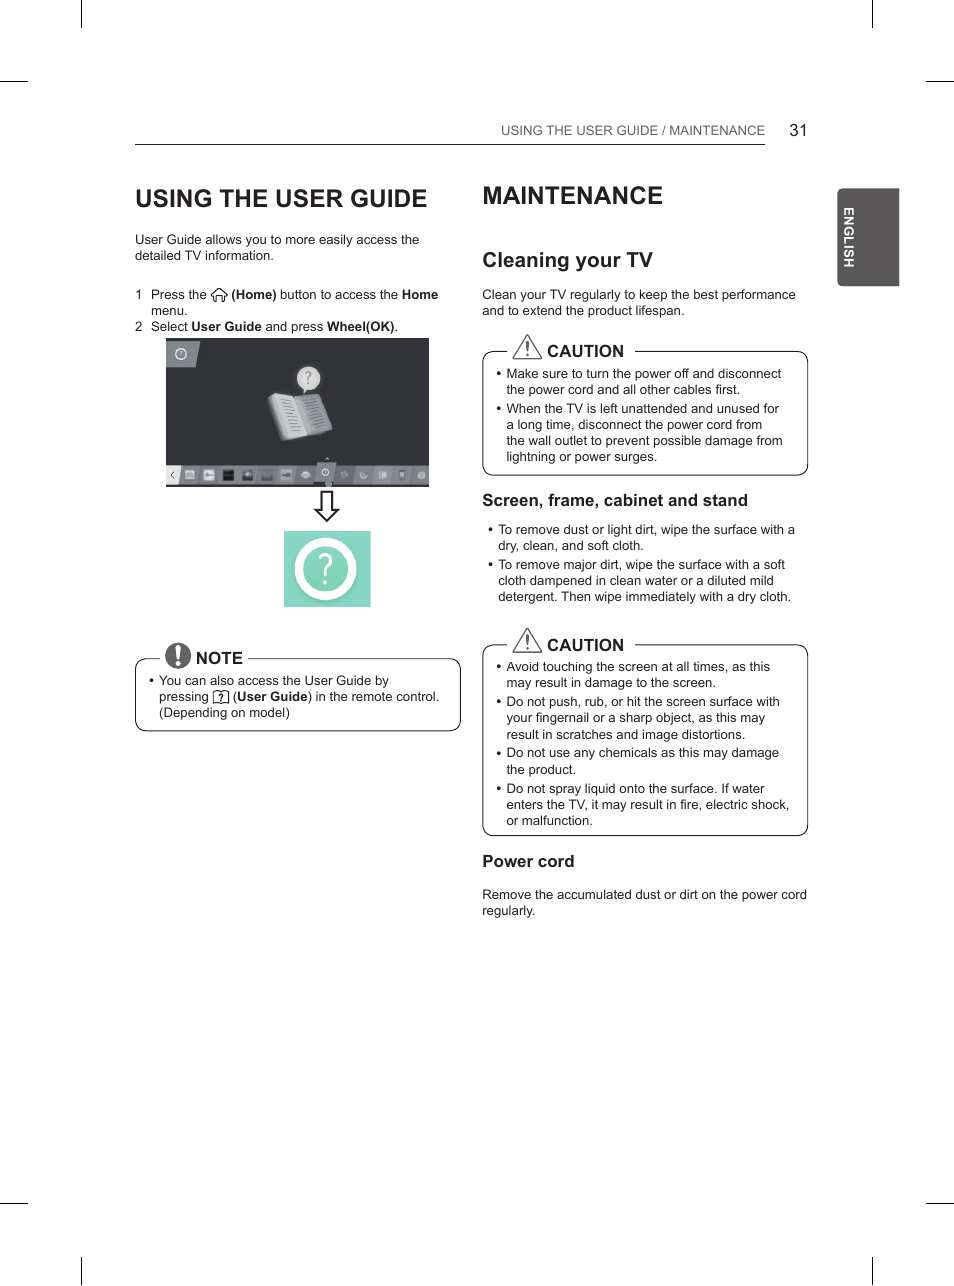 Maintenance, Using the user guide, Cleaning your tv | LG 84UB980V User Manual | Page 87 / 332